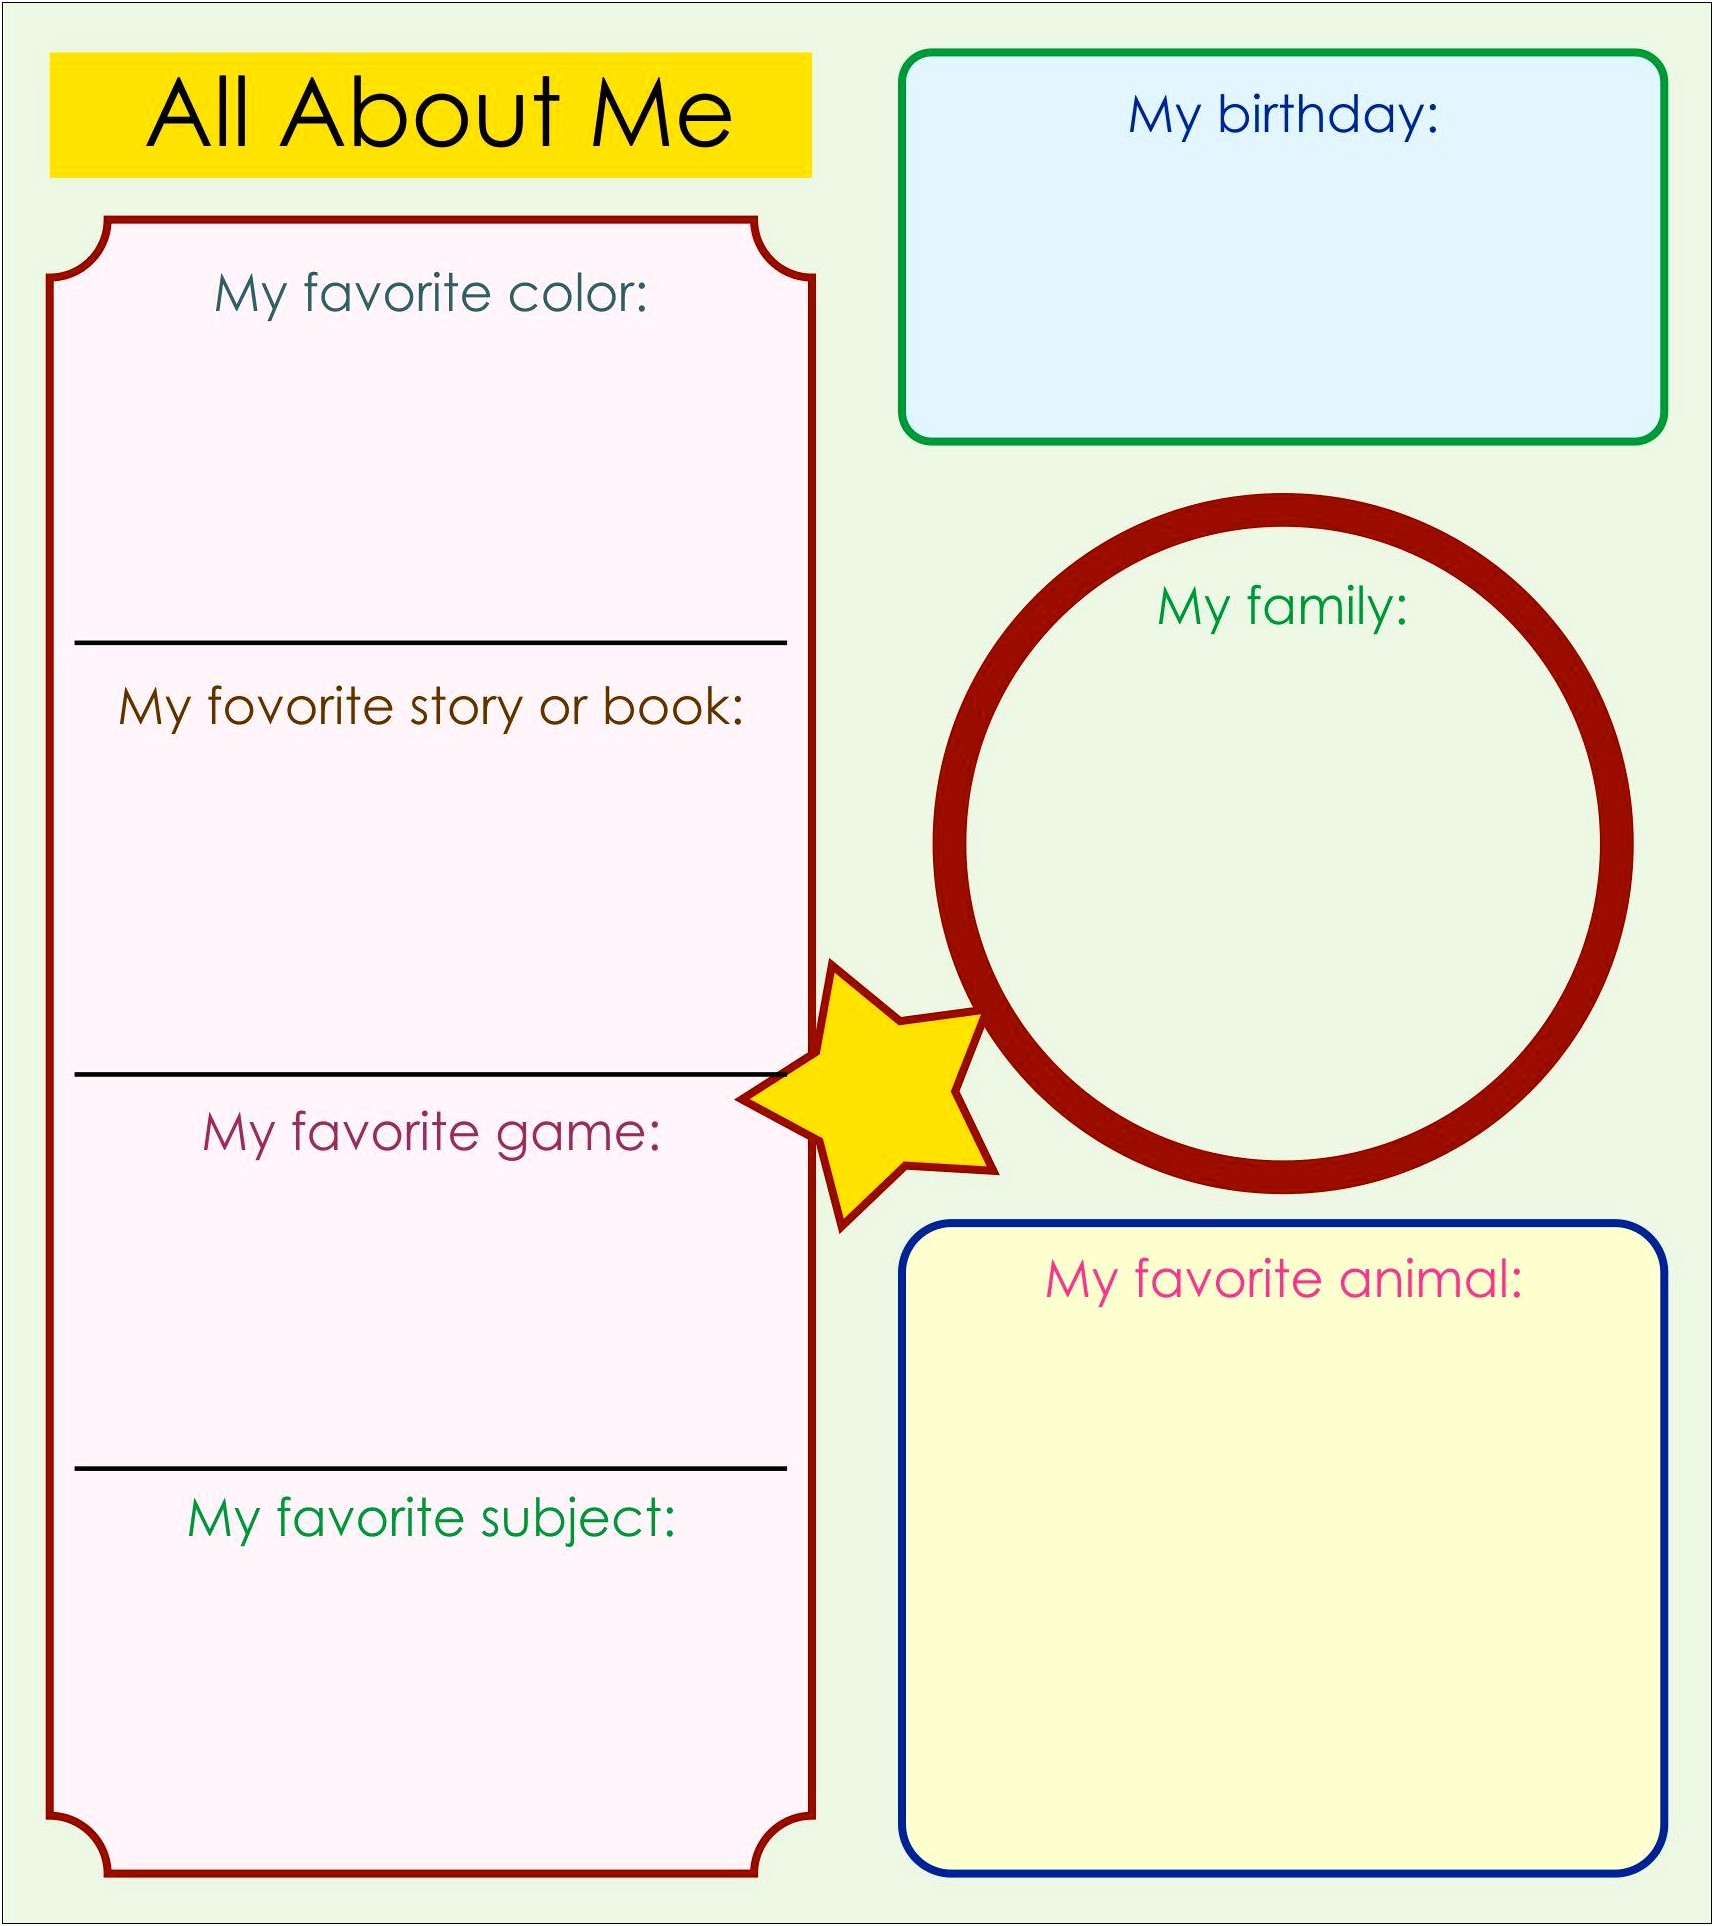 All About Me Book Template Pdf Free